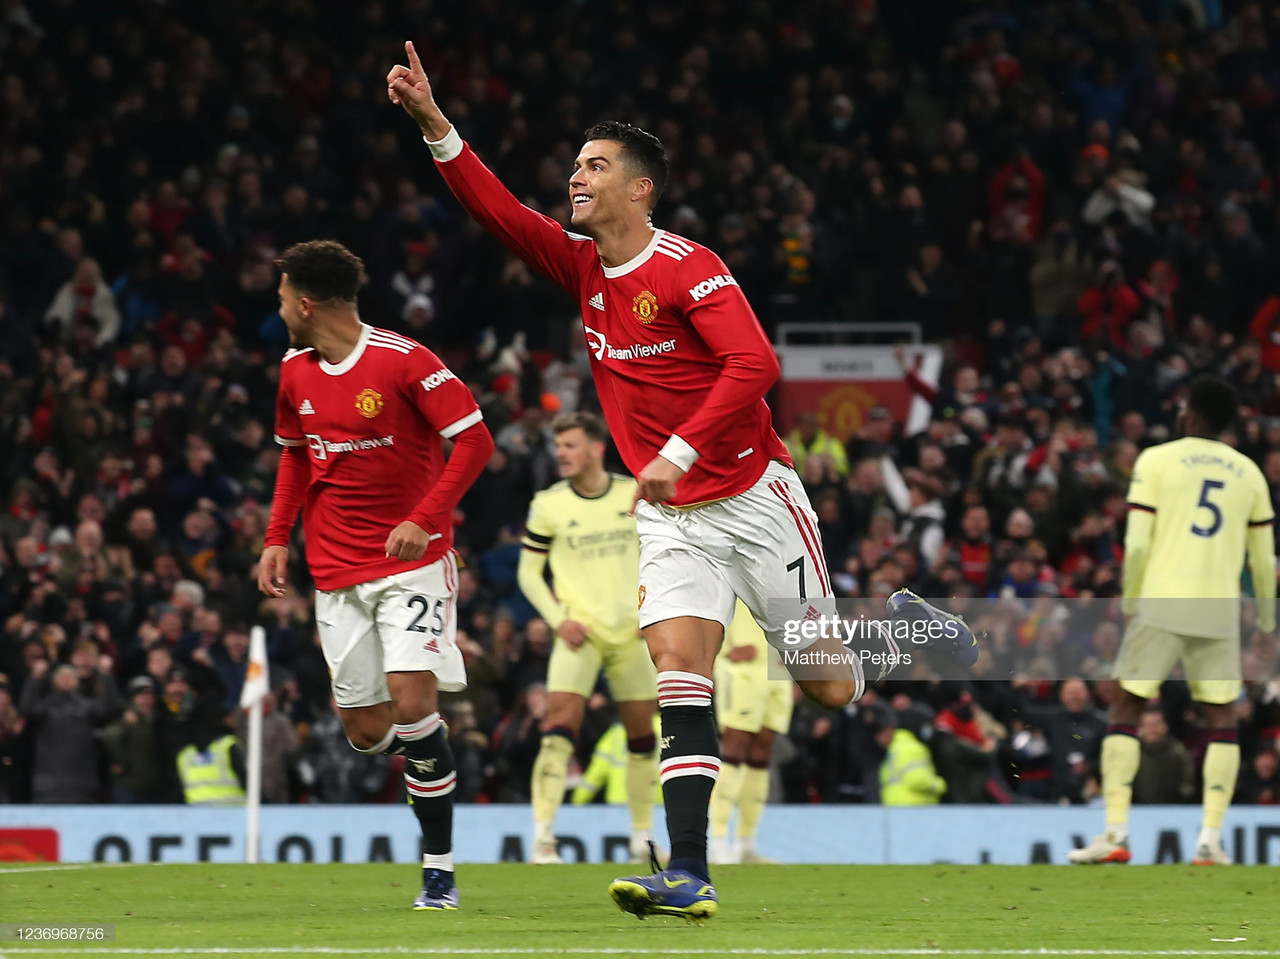 Manchester United 3-2 Arsenal: Cristiano Ronaldo reaches 800 career goals in thrilling style